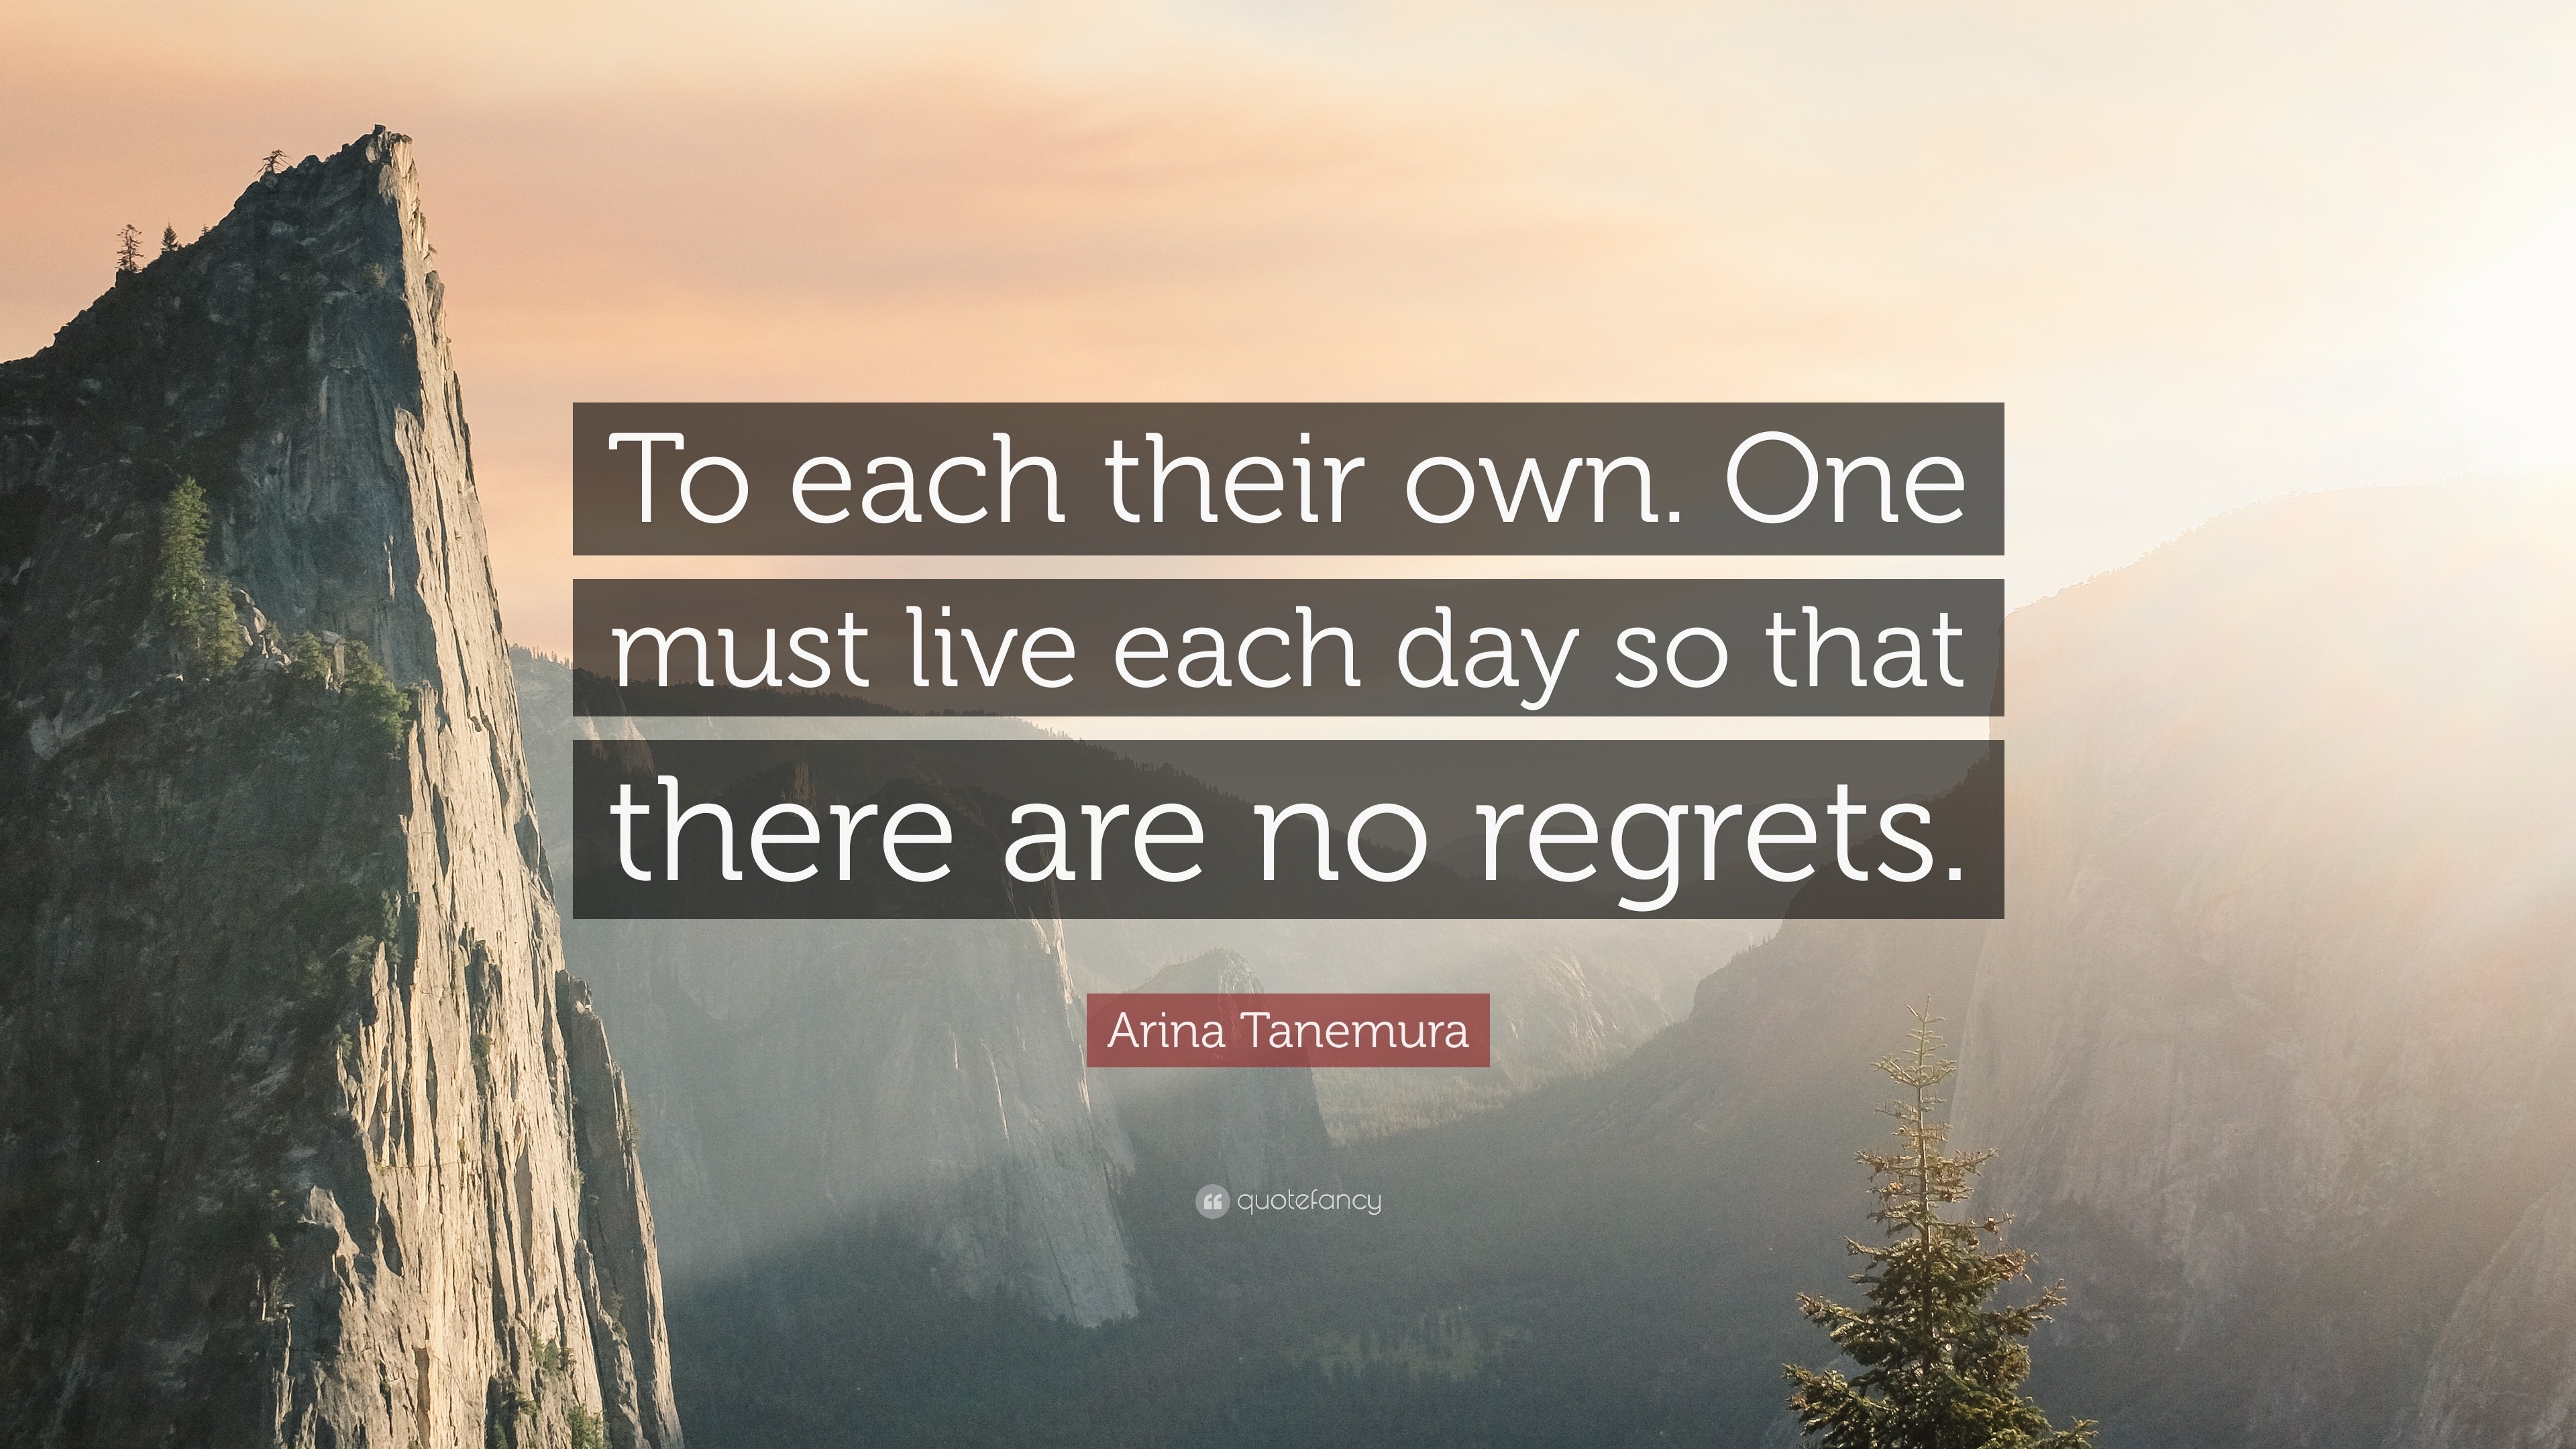 https://quotefancy.com/media/wallpaper/3840x2160/1498220-Arina-Tanemura-Quote-To-each-their-own-One-must-live-each-day-so.jpg